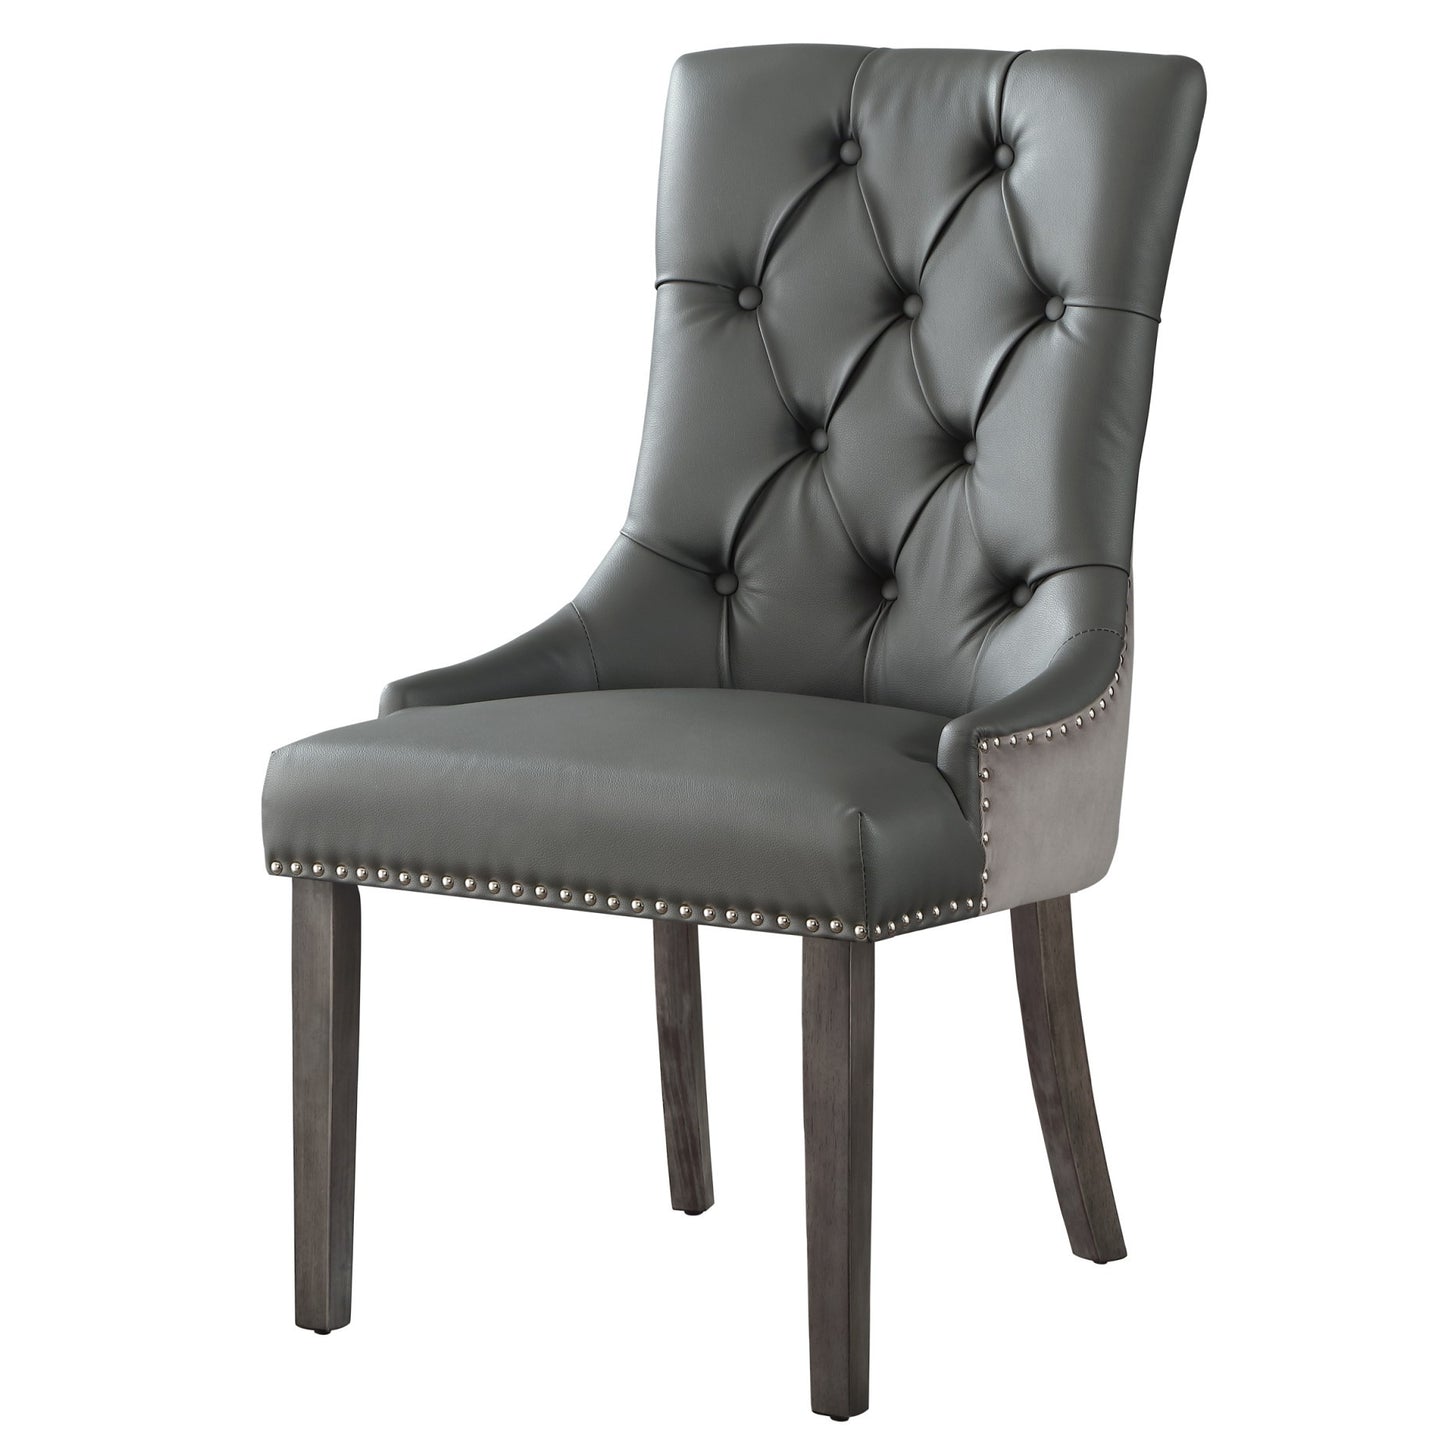 Set Of Two Tufted Dark Gray And Black Upholstered Faux Leather Dining Side Chairs